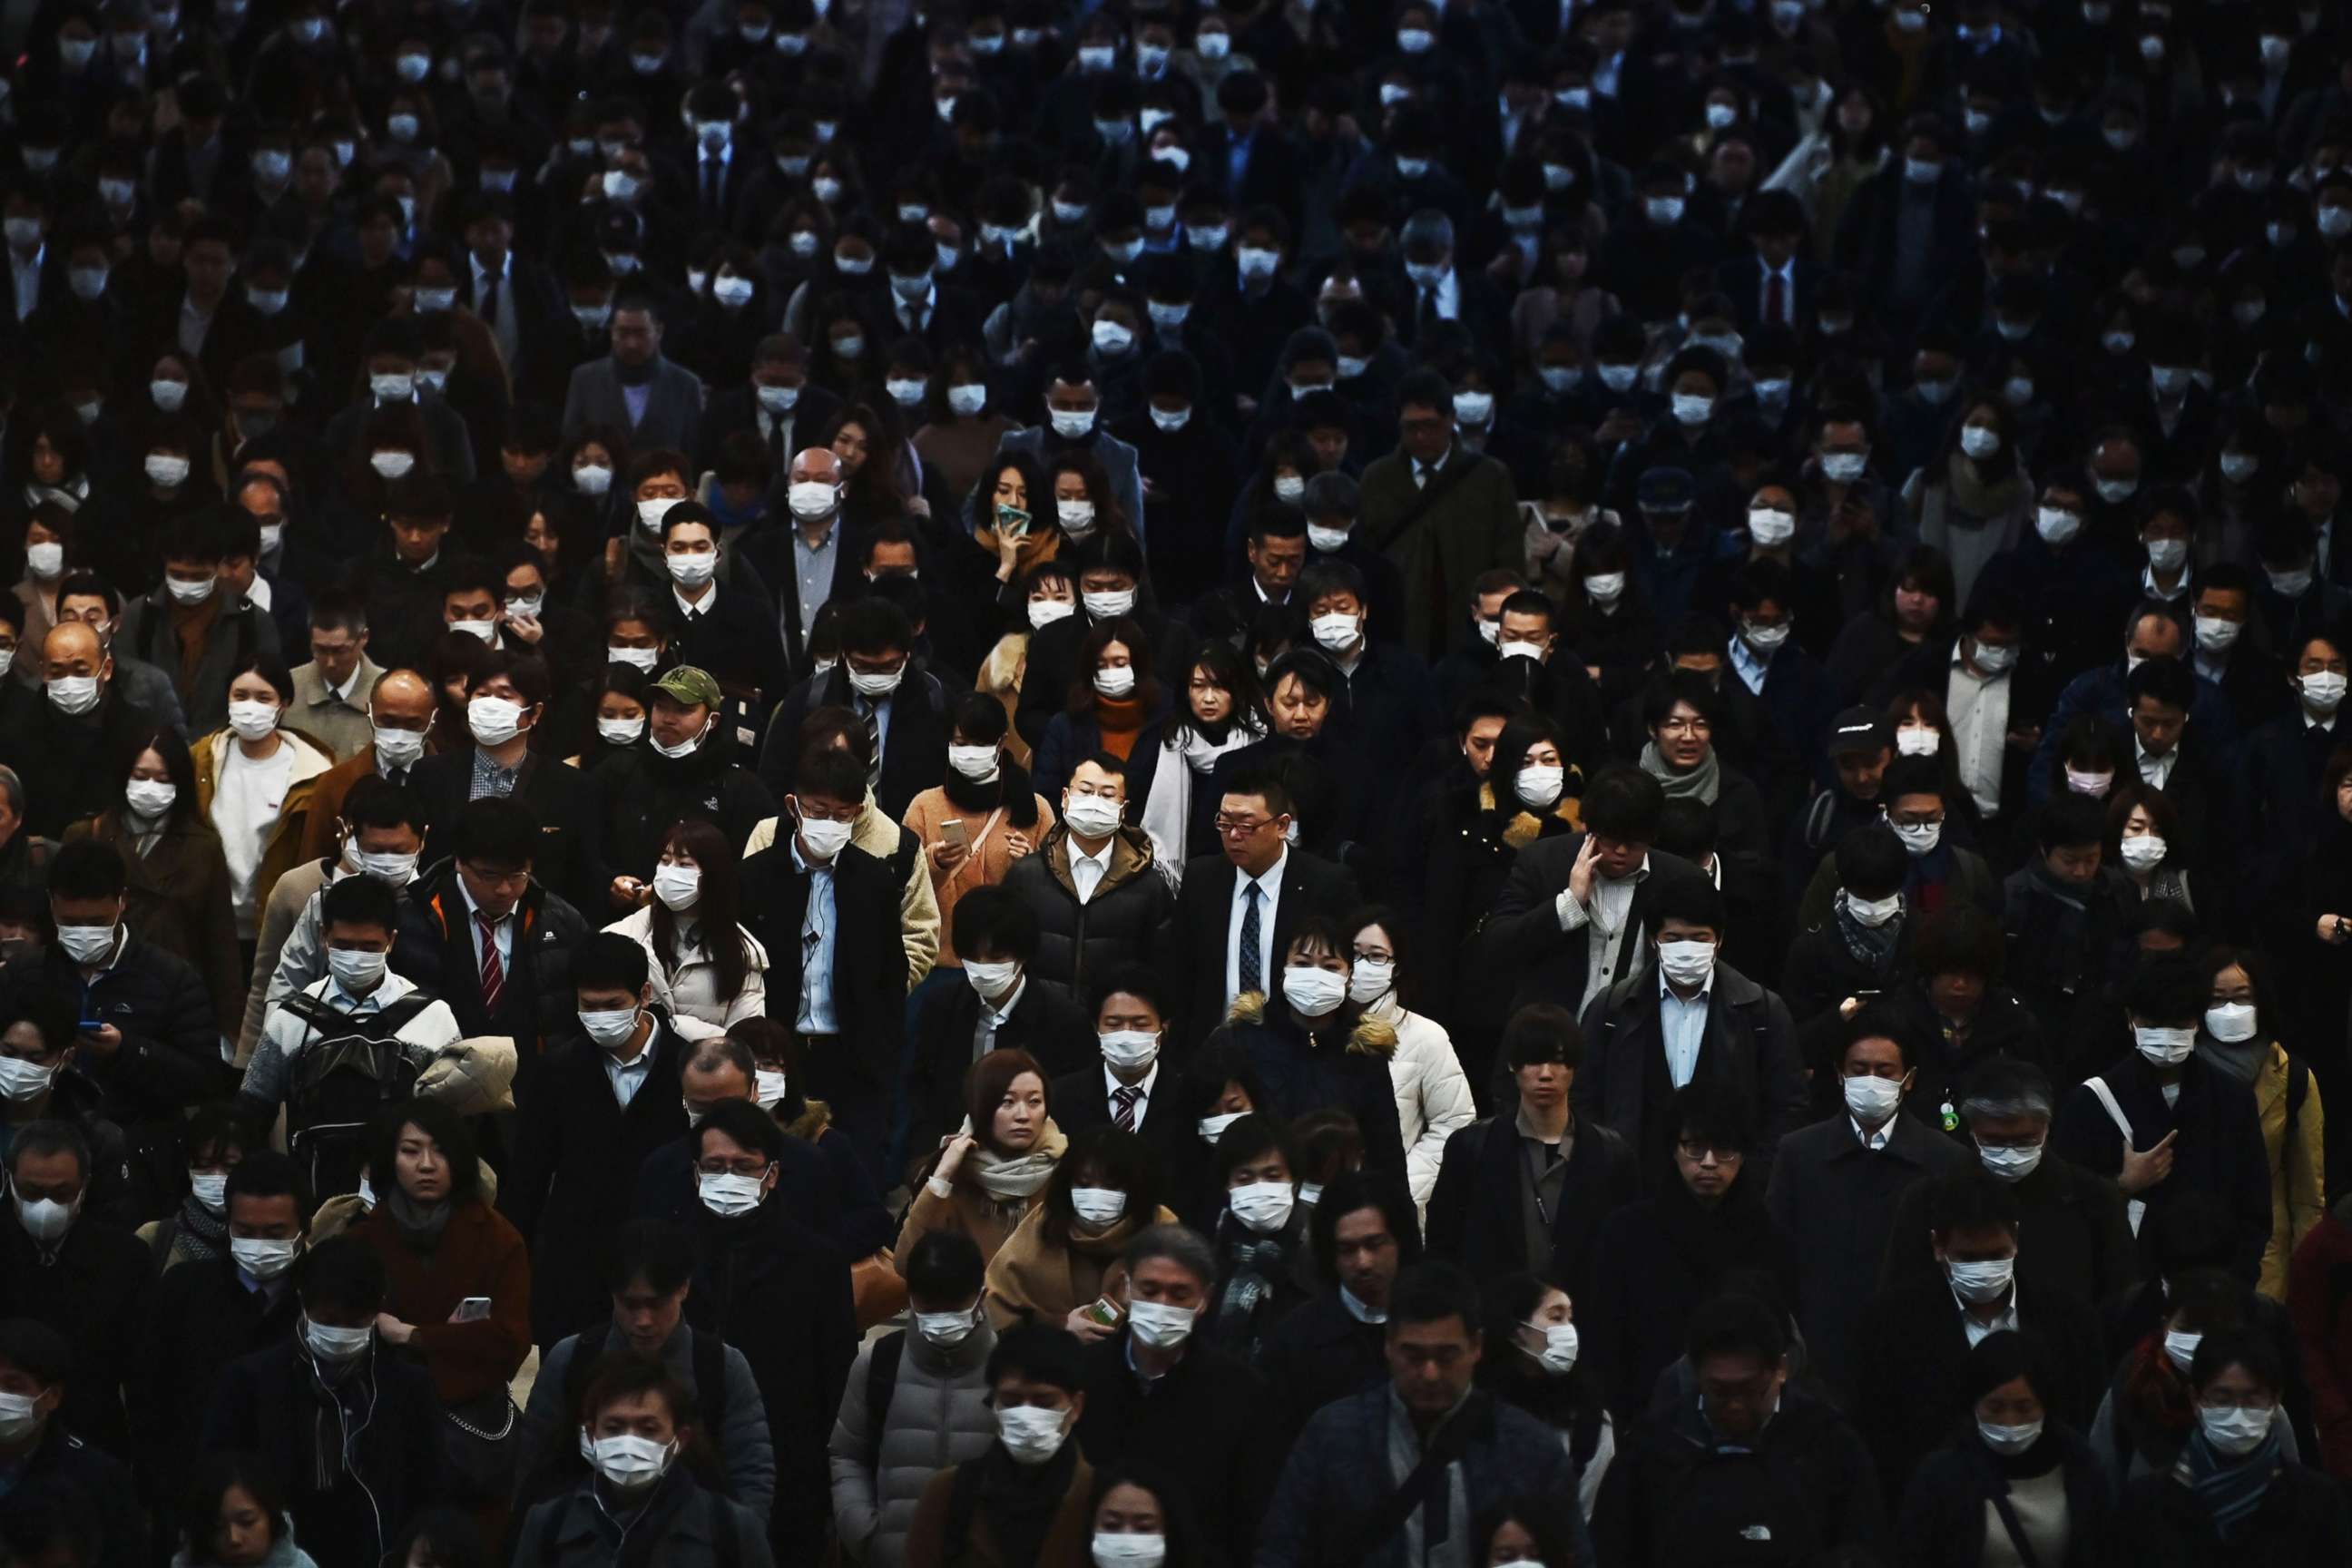 PHOTO: Mask-clad commuters make their way to work during morning rush hour at the Shinagawa train station, in Tokyo on Feb. 28, 2020. \